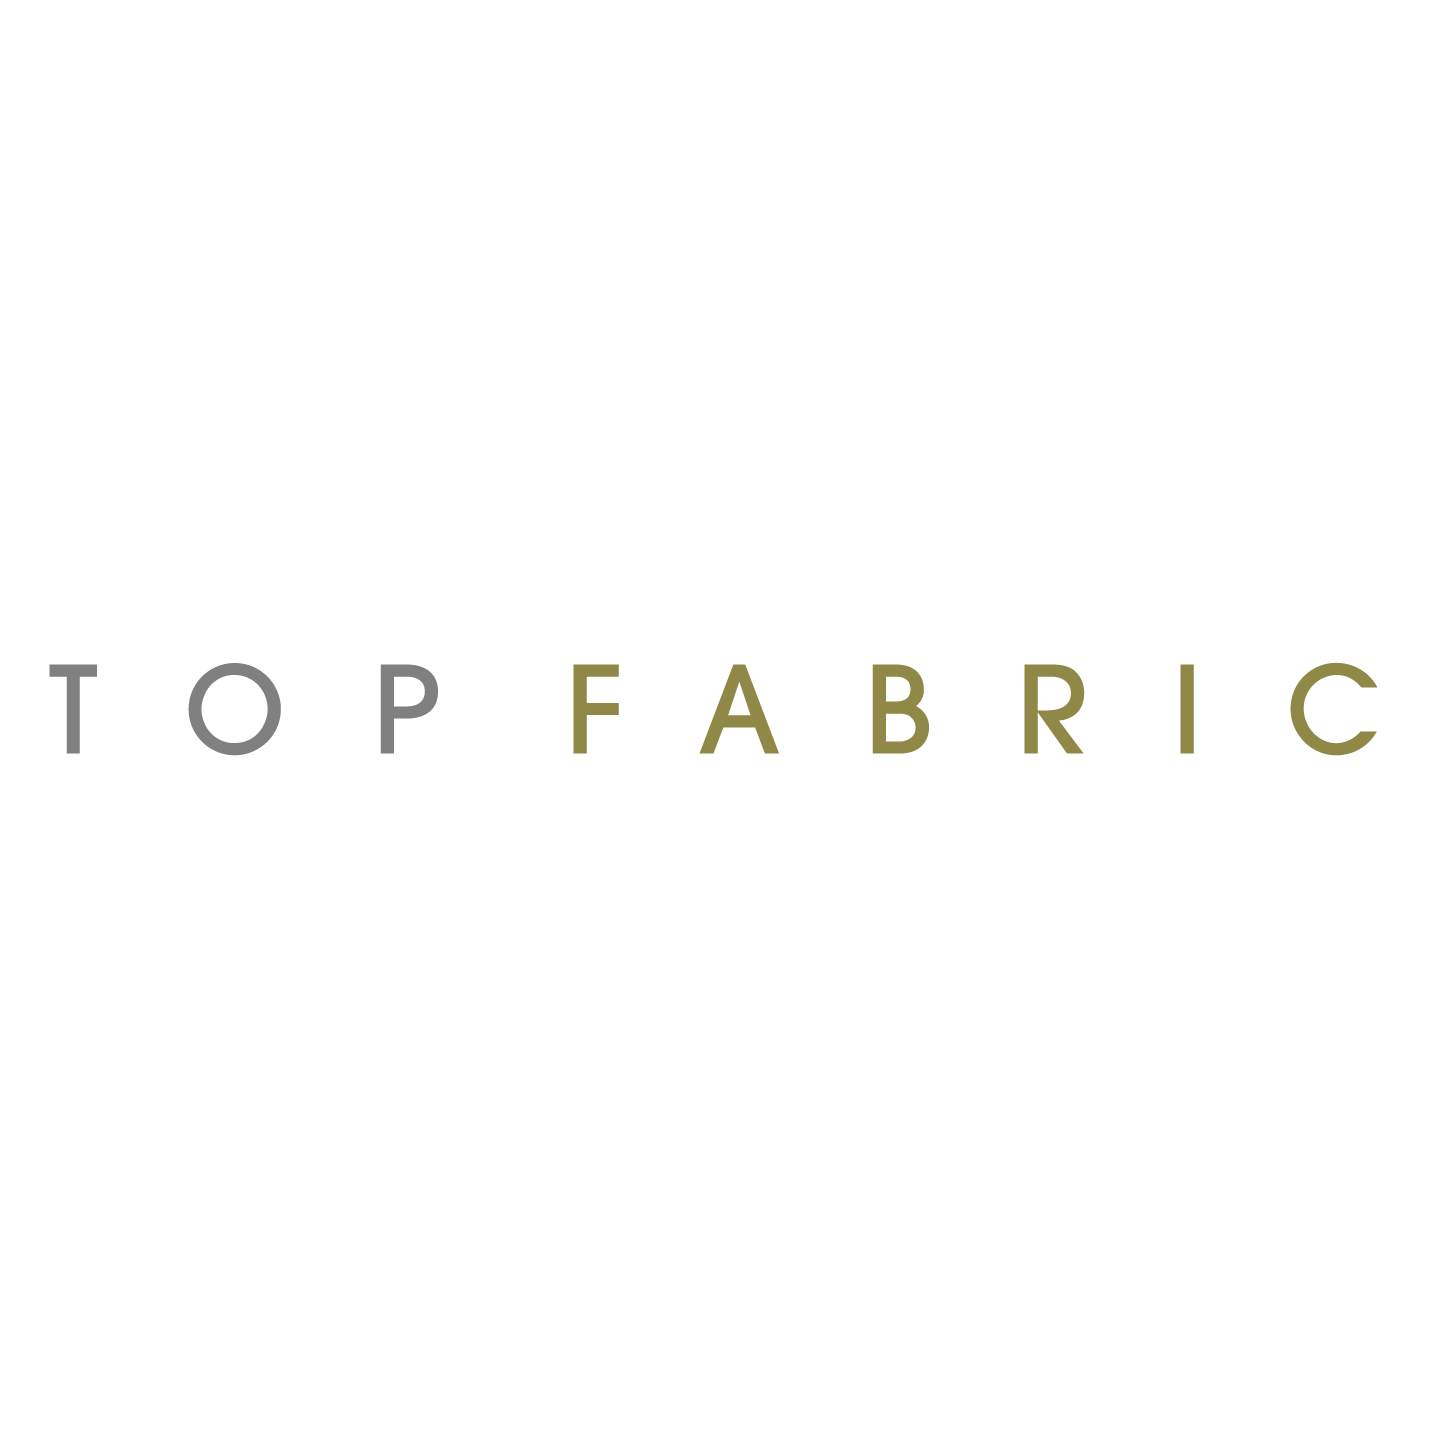 Buy fabric online - heavy weight, boiled wool, jersey ...
